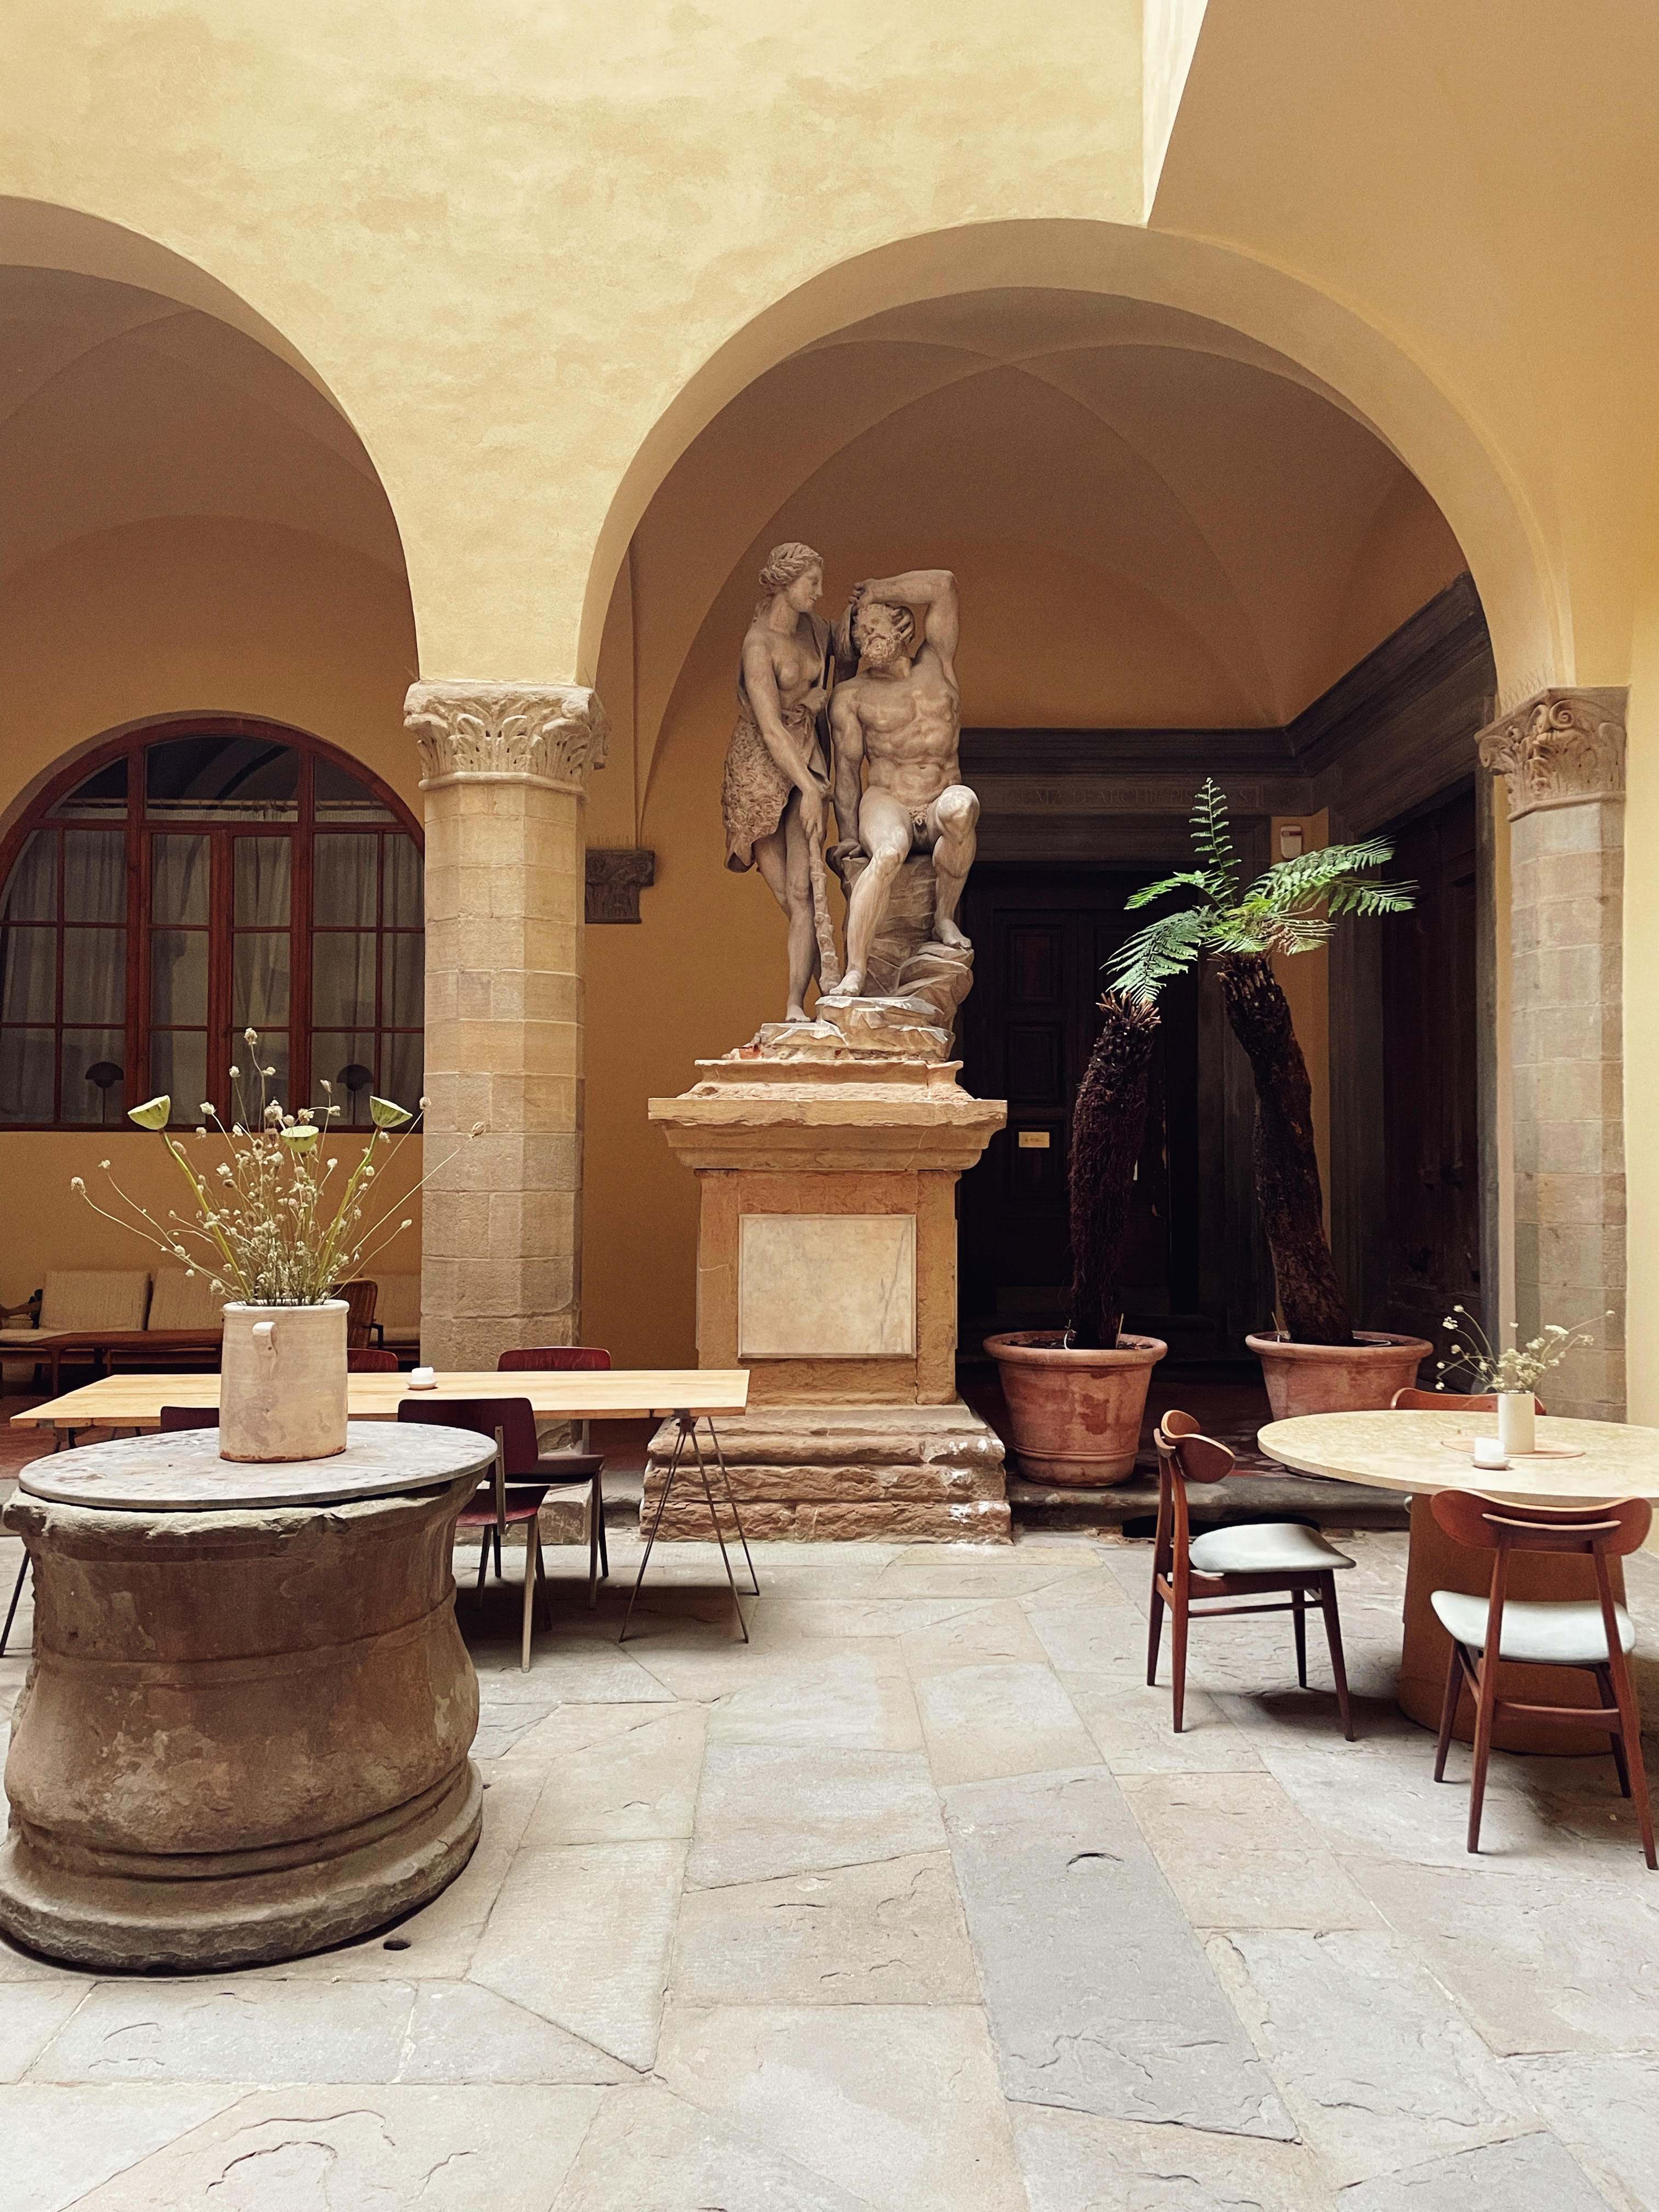 Internal Palazzo in Florence with columns and arches, Italian statues and palm trees